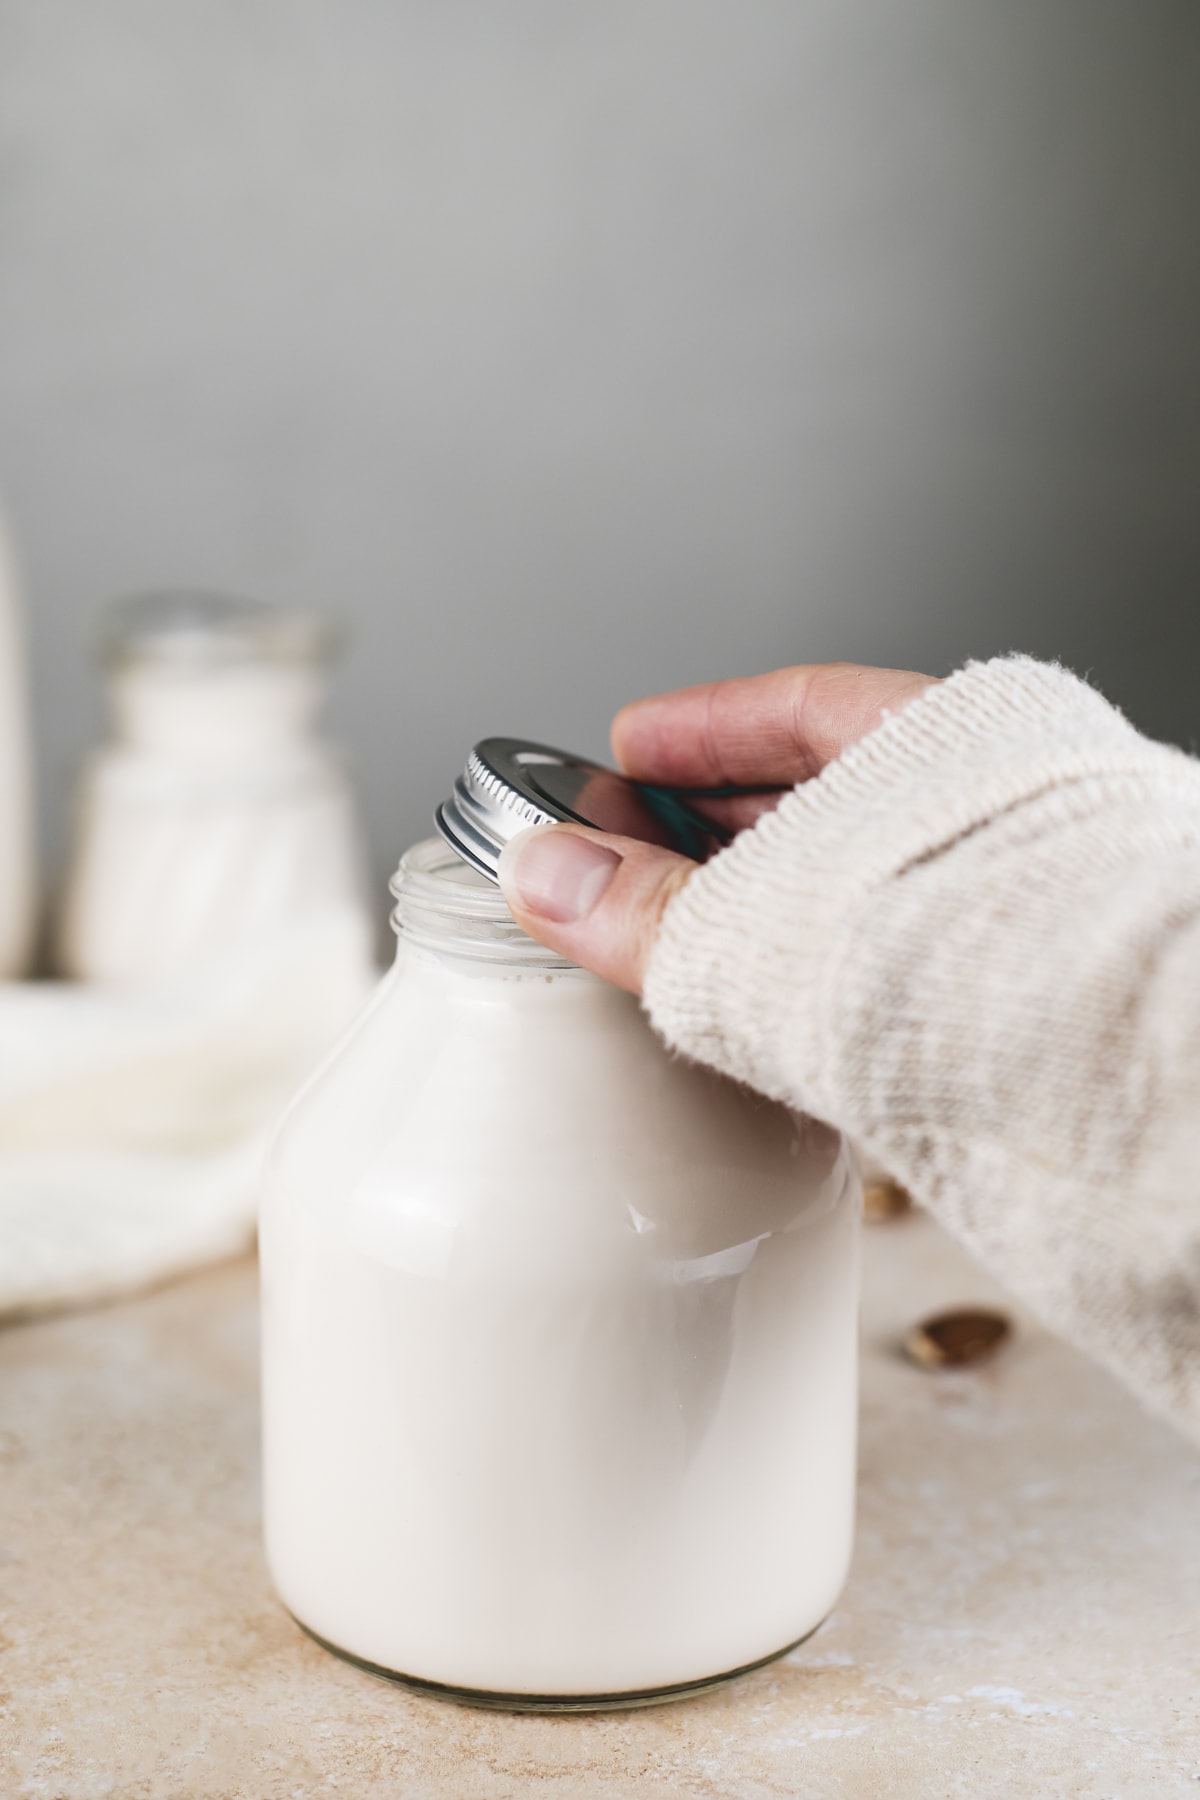 A lid being placed on a jar full of homemade almond milk.